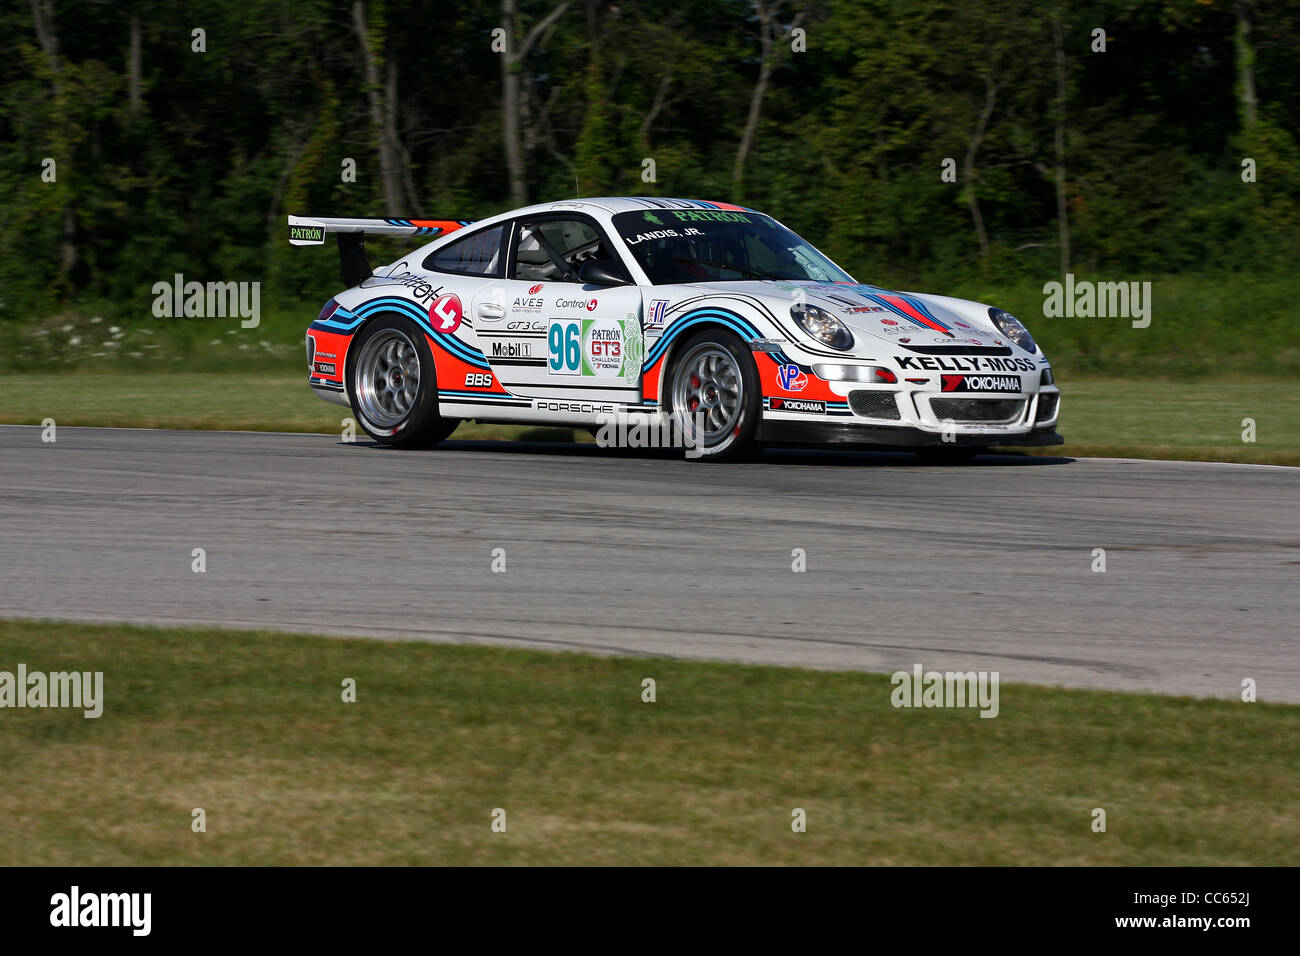 GT3 Porsche at track crossover Autobahn Country Club Race Track Stock Photo